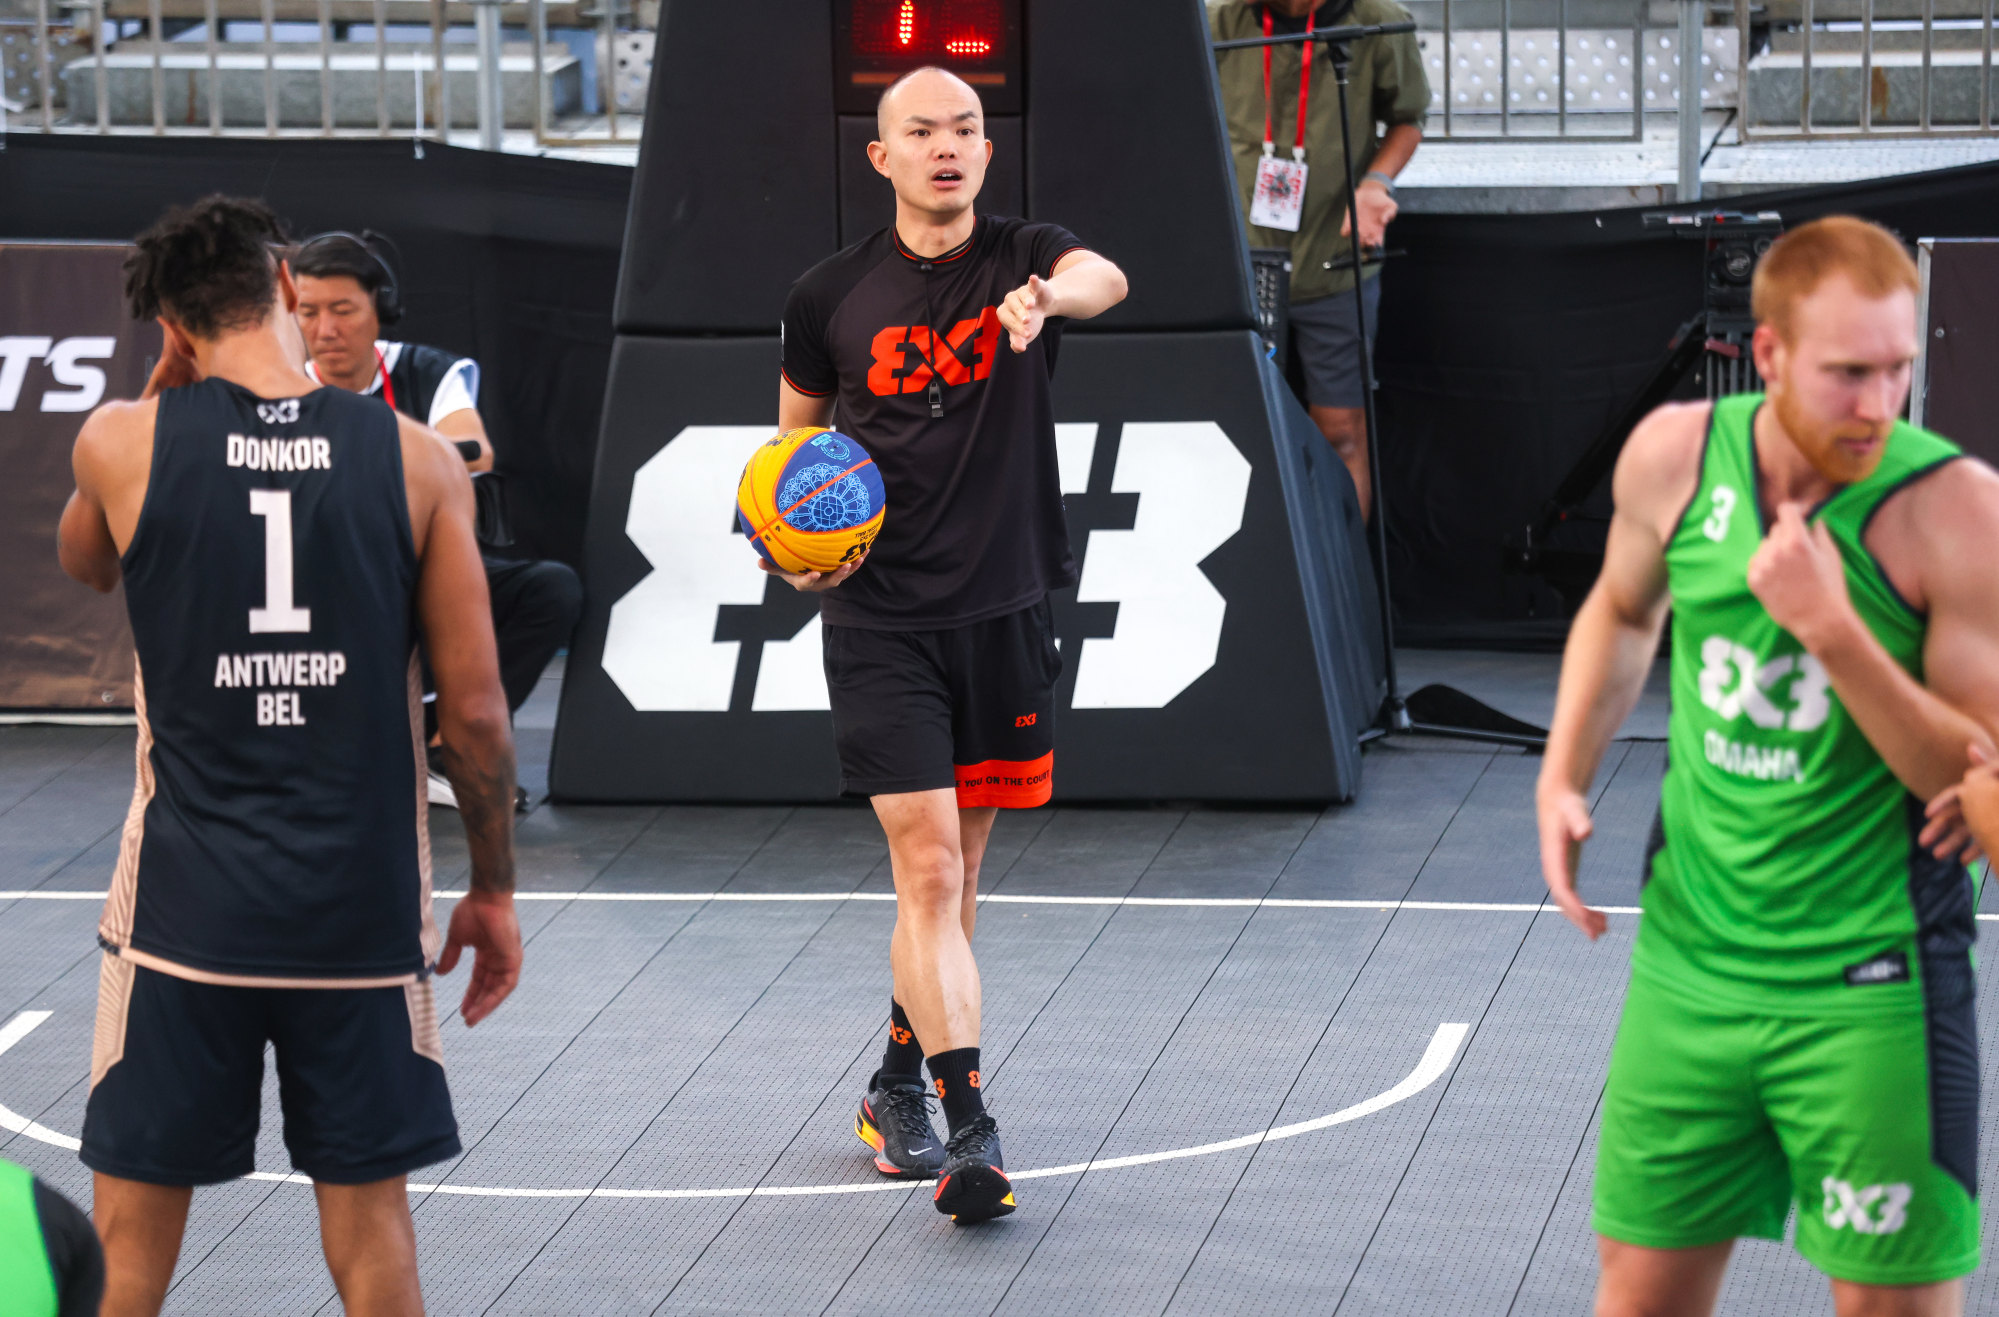 fiba 3x3 world tour: hong kong basketball wasting resources, being left behind in asia, official says